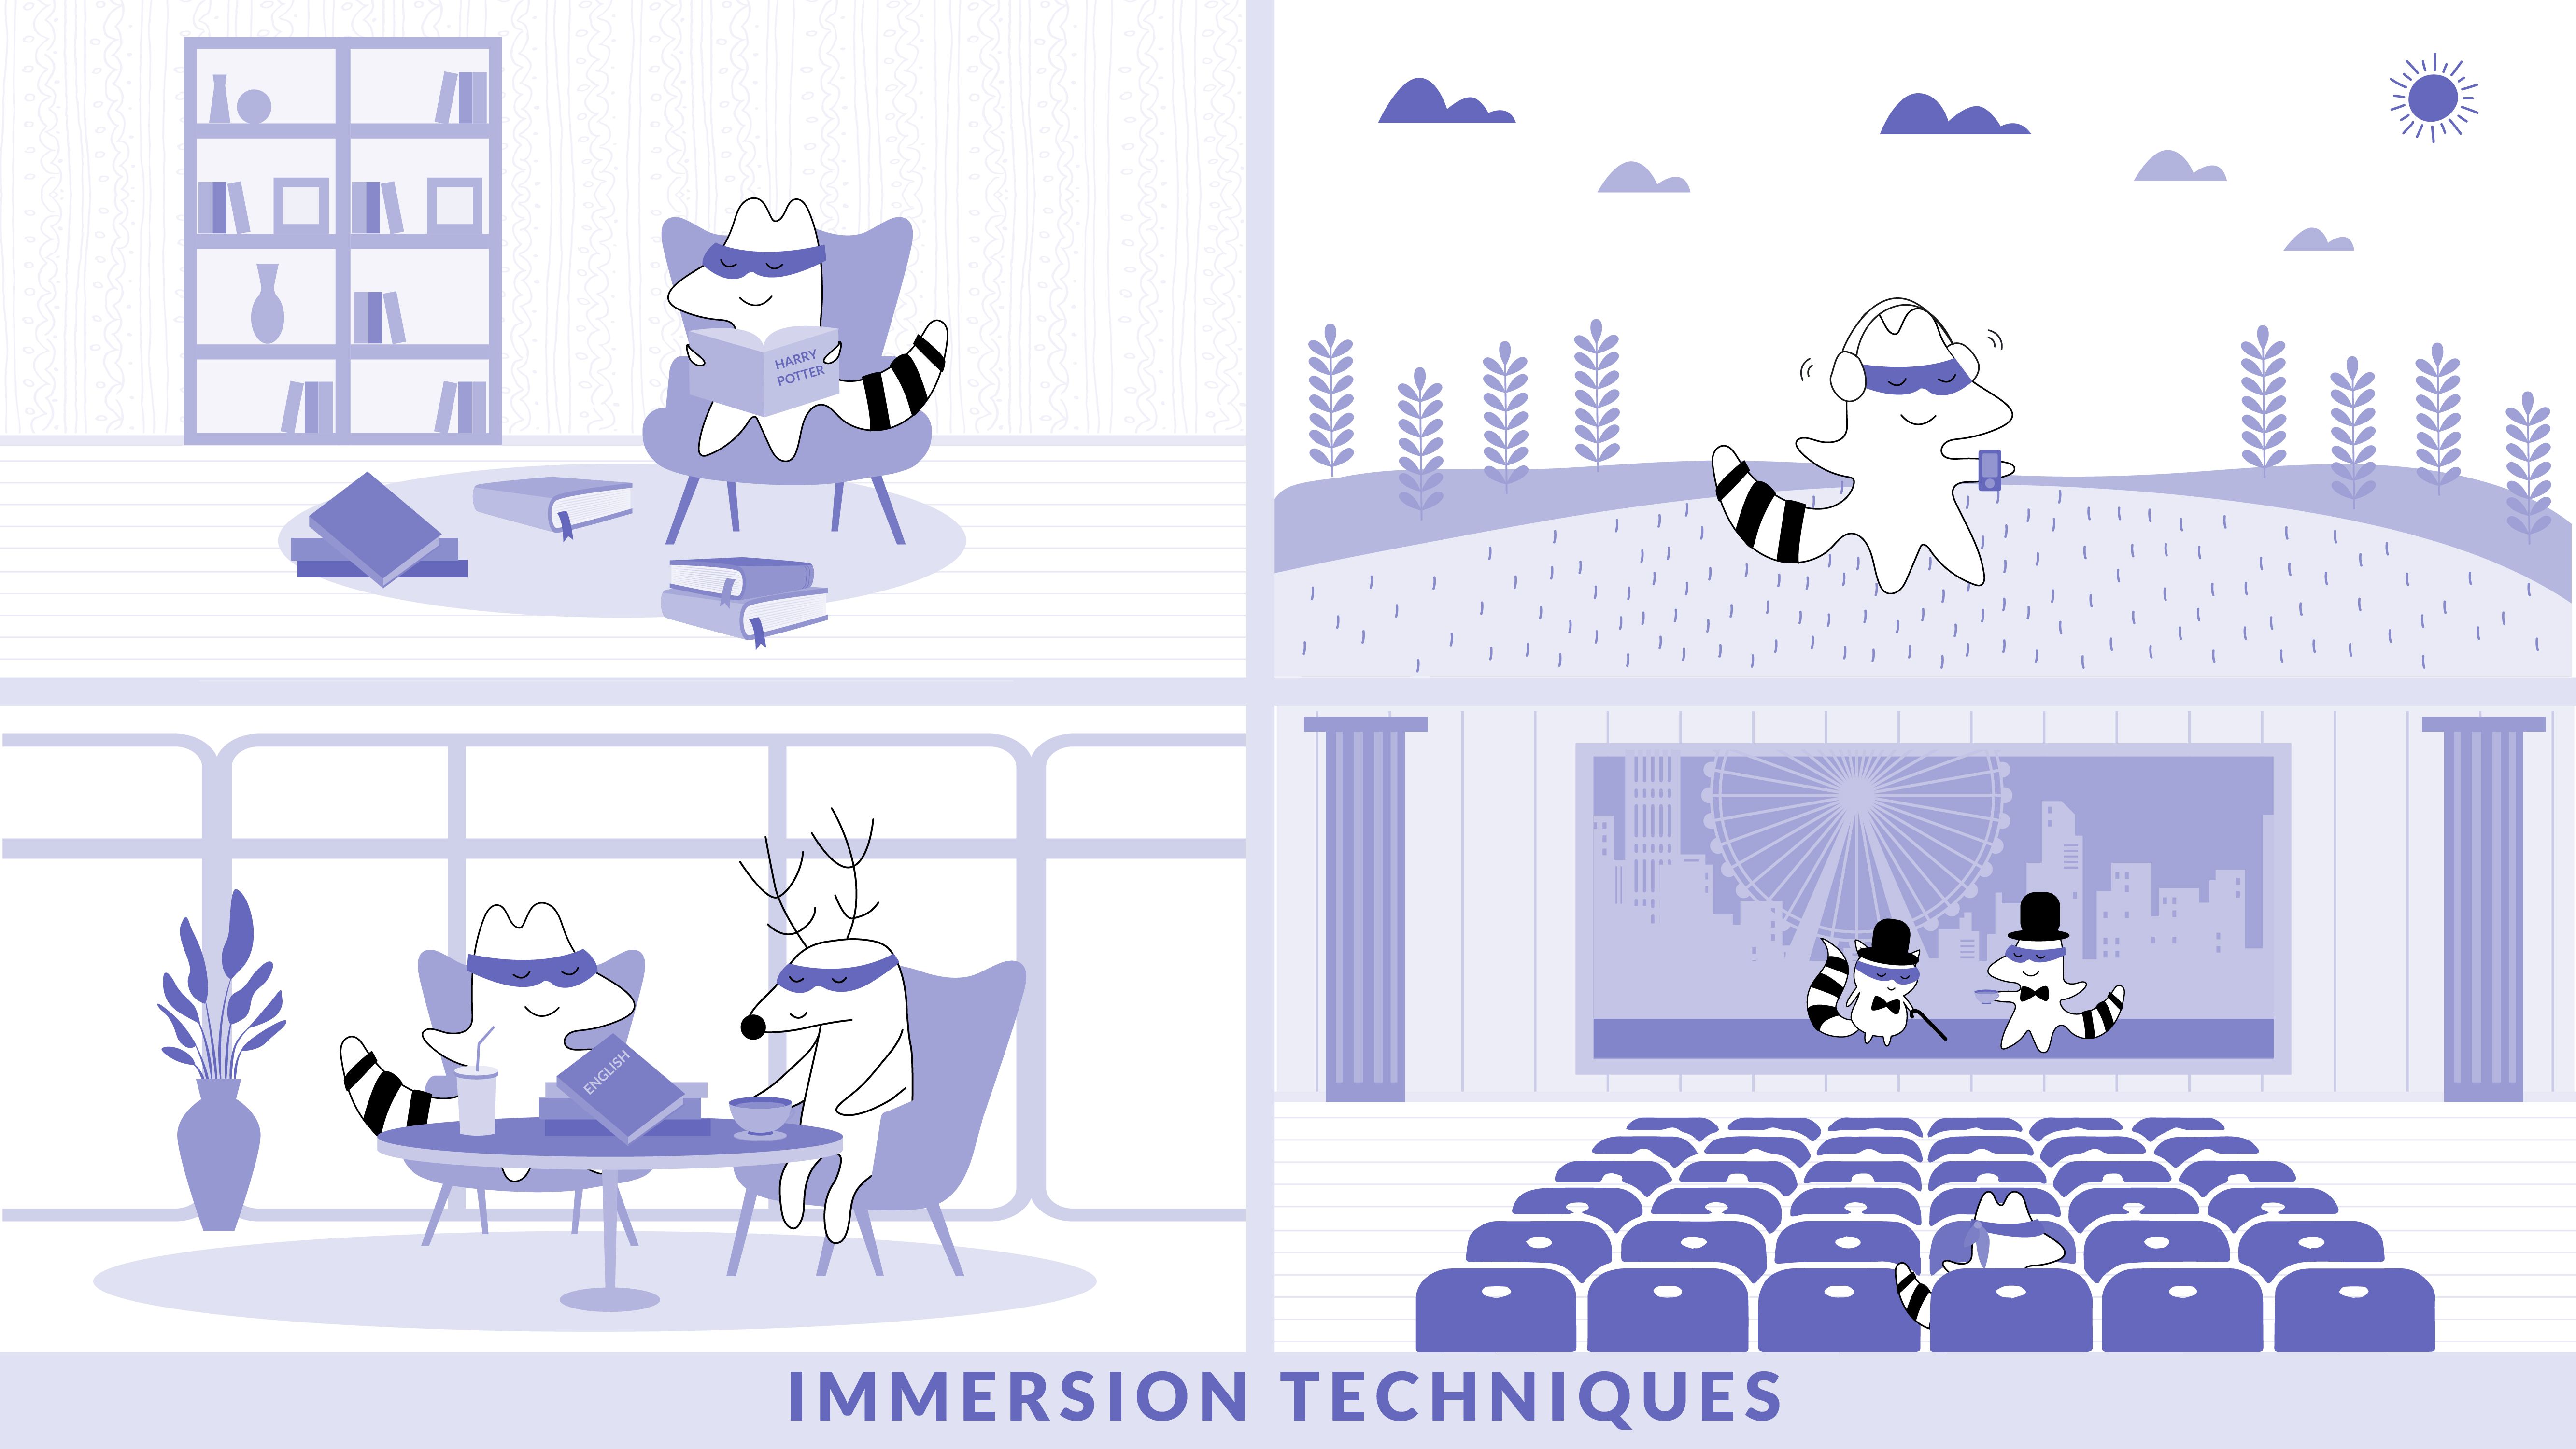 A collage of four images entitled “Immersion Techniques